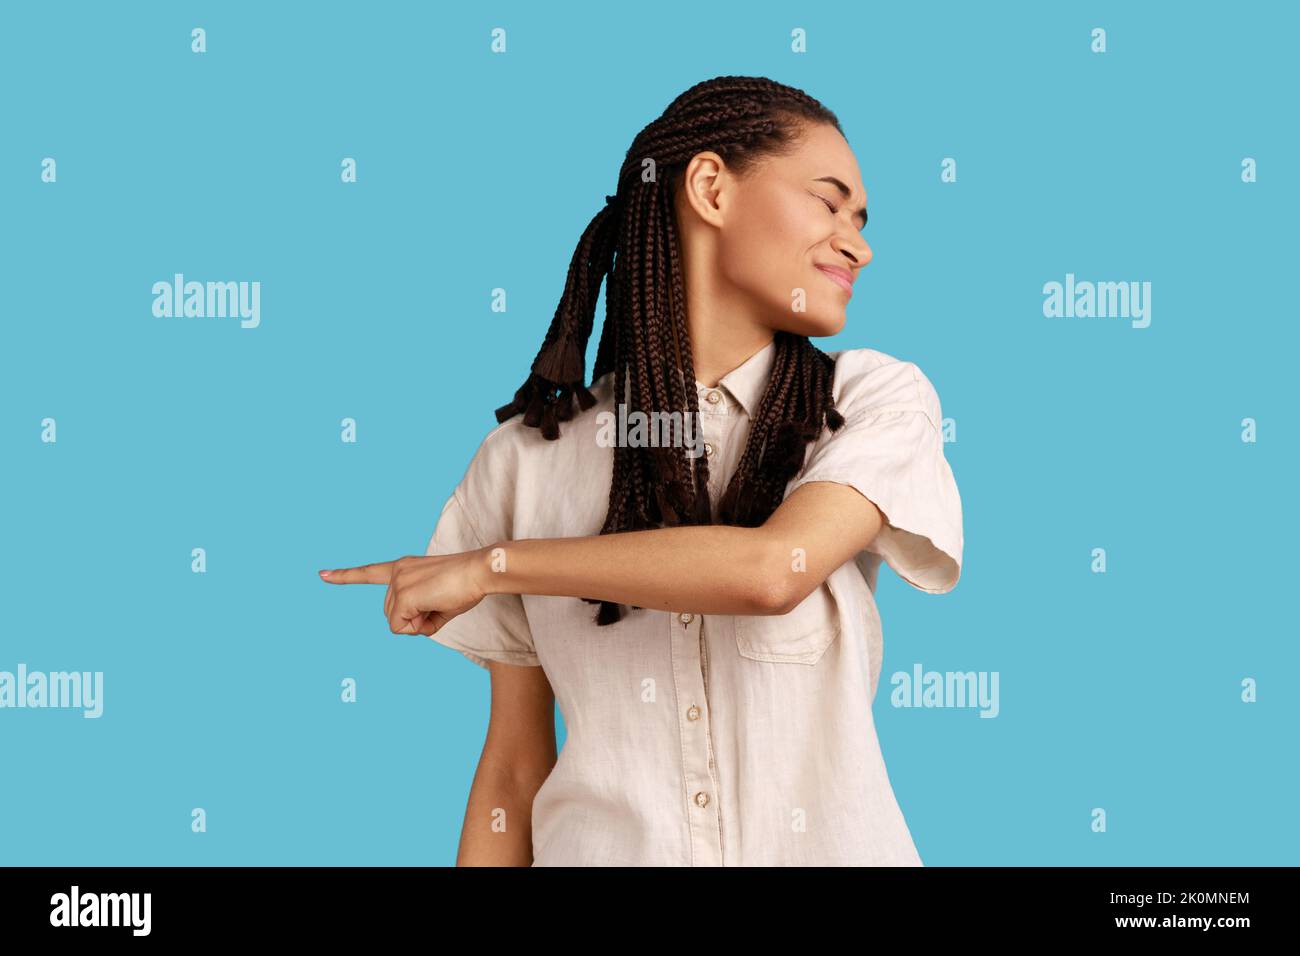 Get out. Irritated upset woman with black dreadlocks pointing away, quarreling and scolding, showing exit with angry grimace, feeling betrayed. Indoor studio shot isolated on blue background. Stock Photo